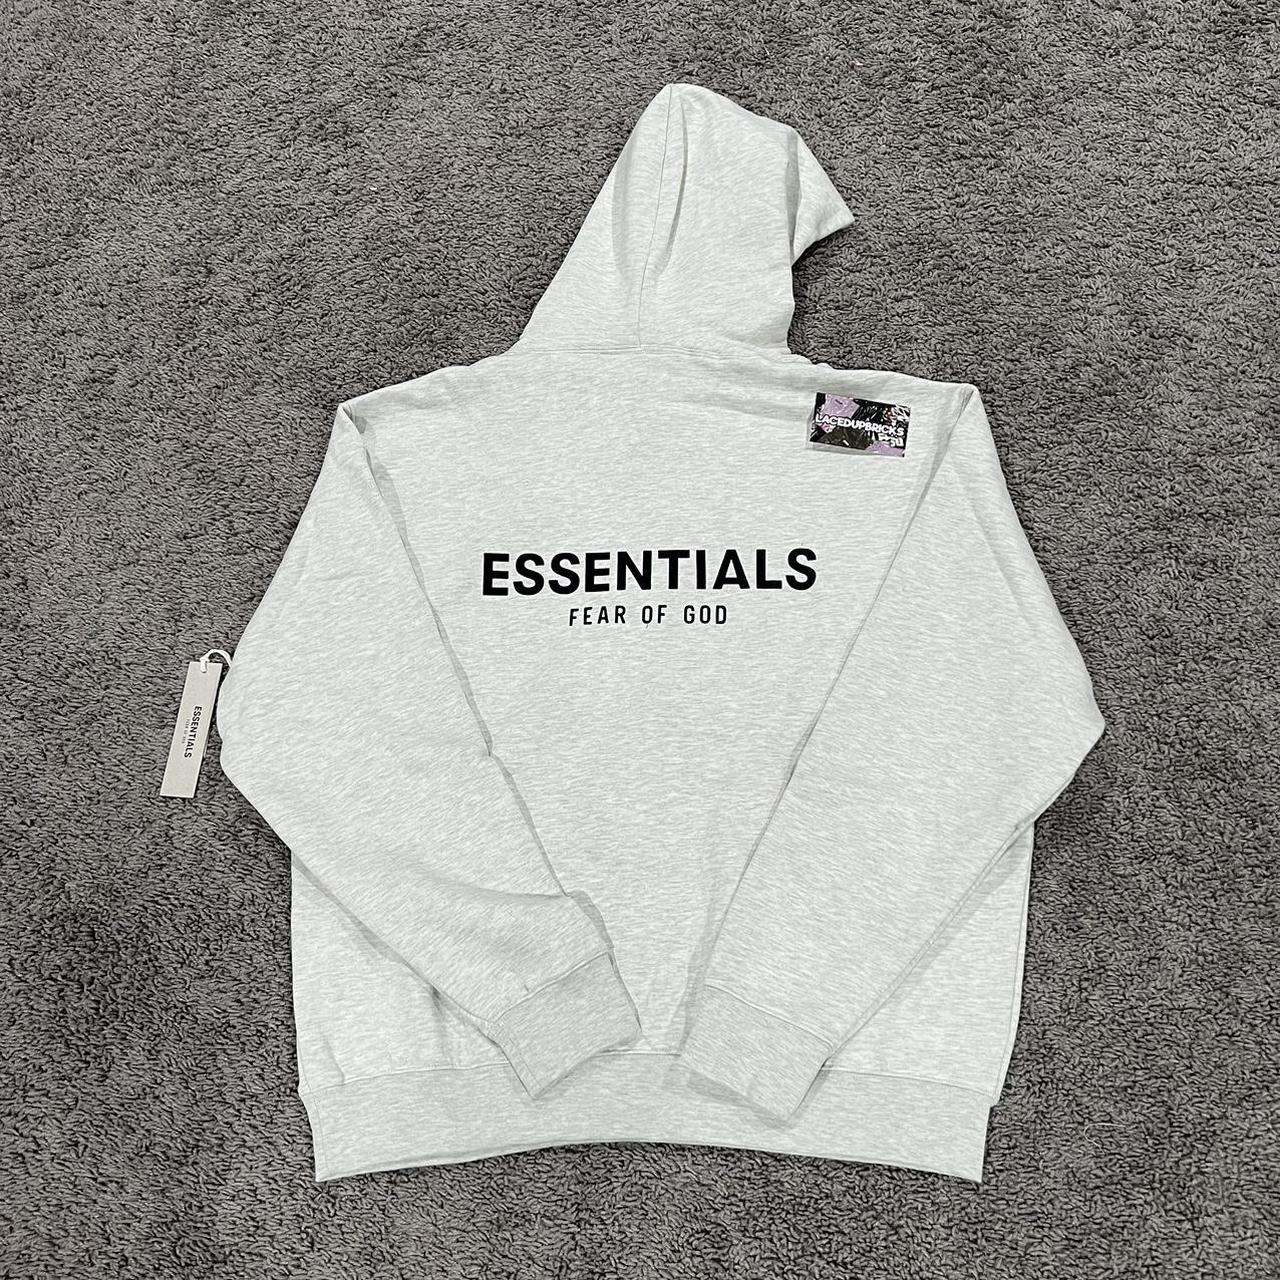 Fear of God ESSENTIALS, Authenticity Guaranteed